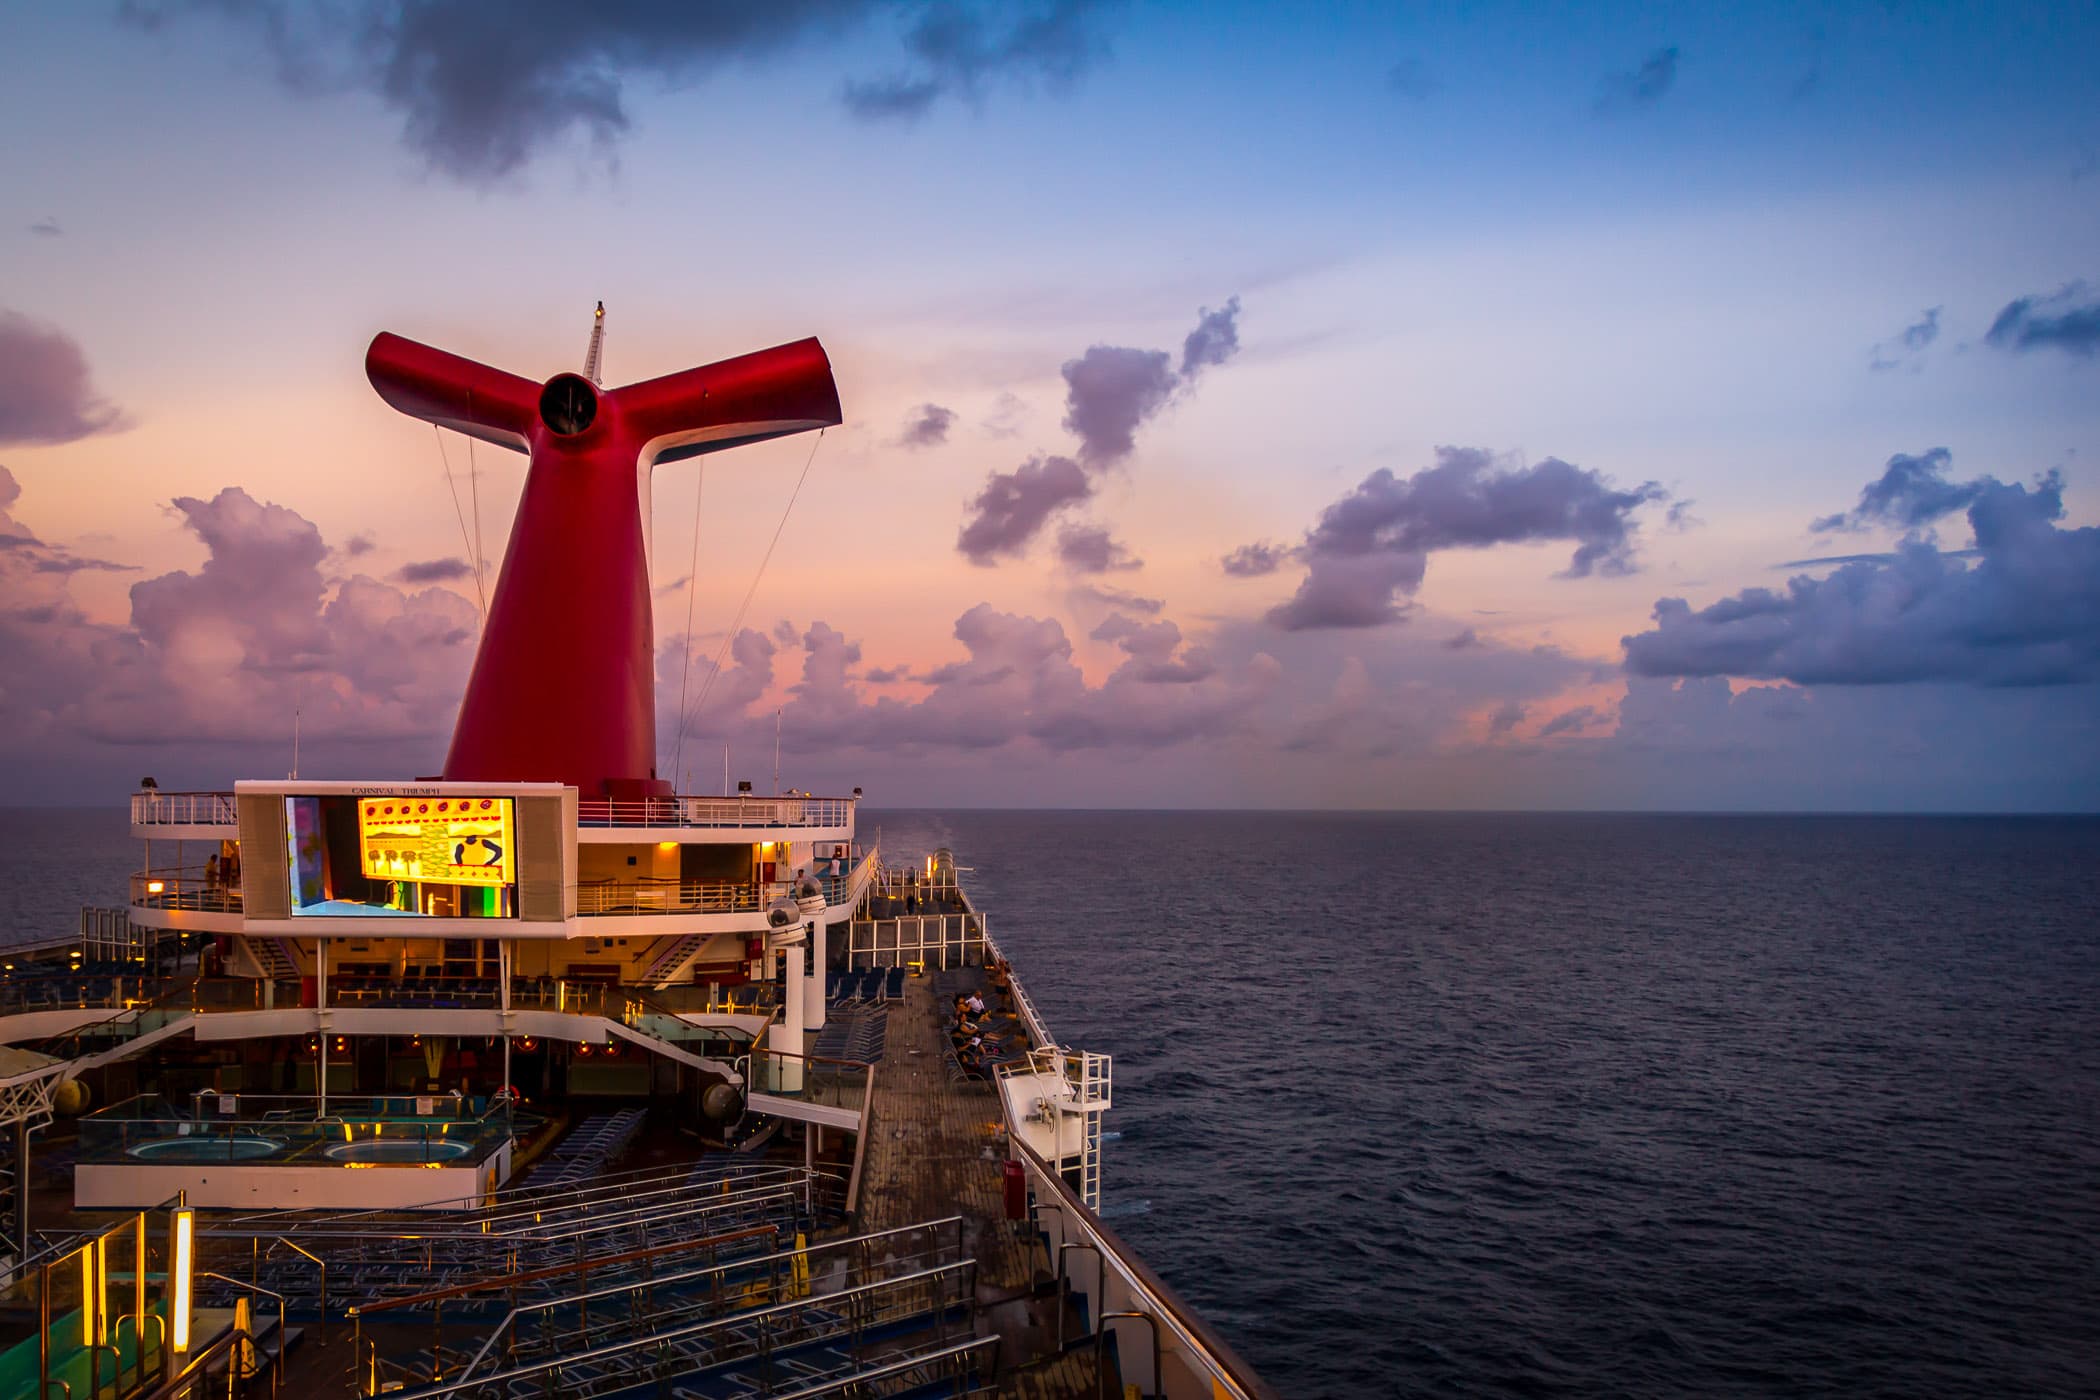 Morning twilight lights the Carnival Triumph as she sails through the Gulf of Mexico.